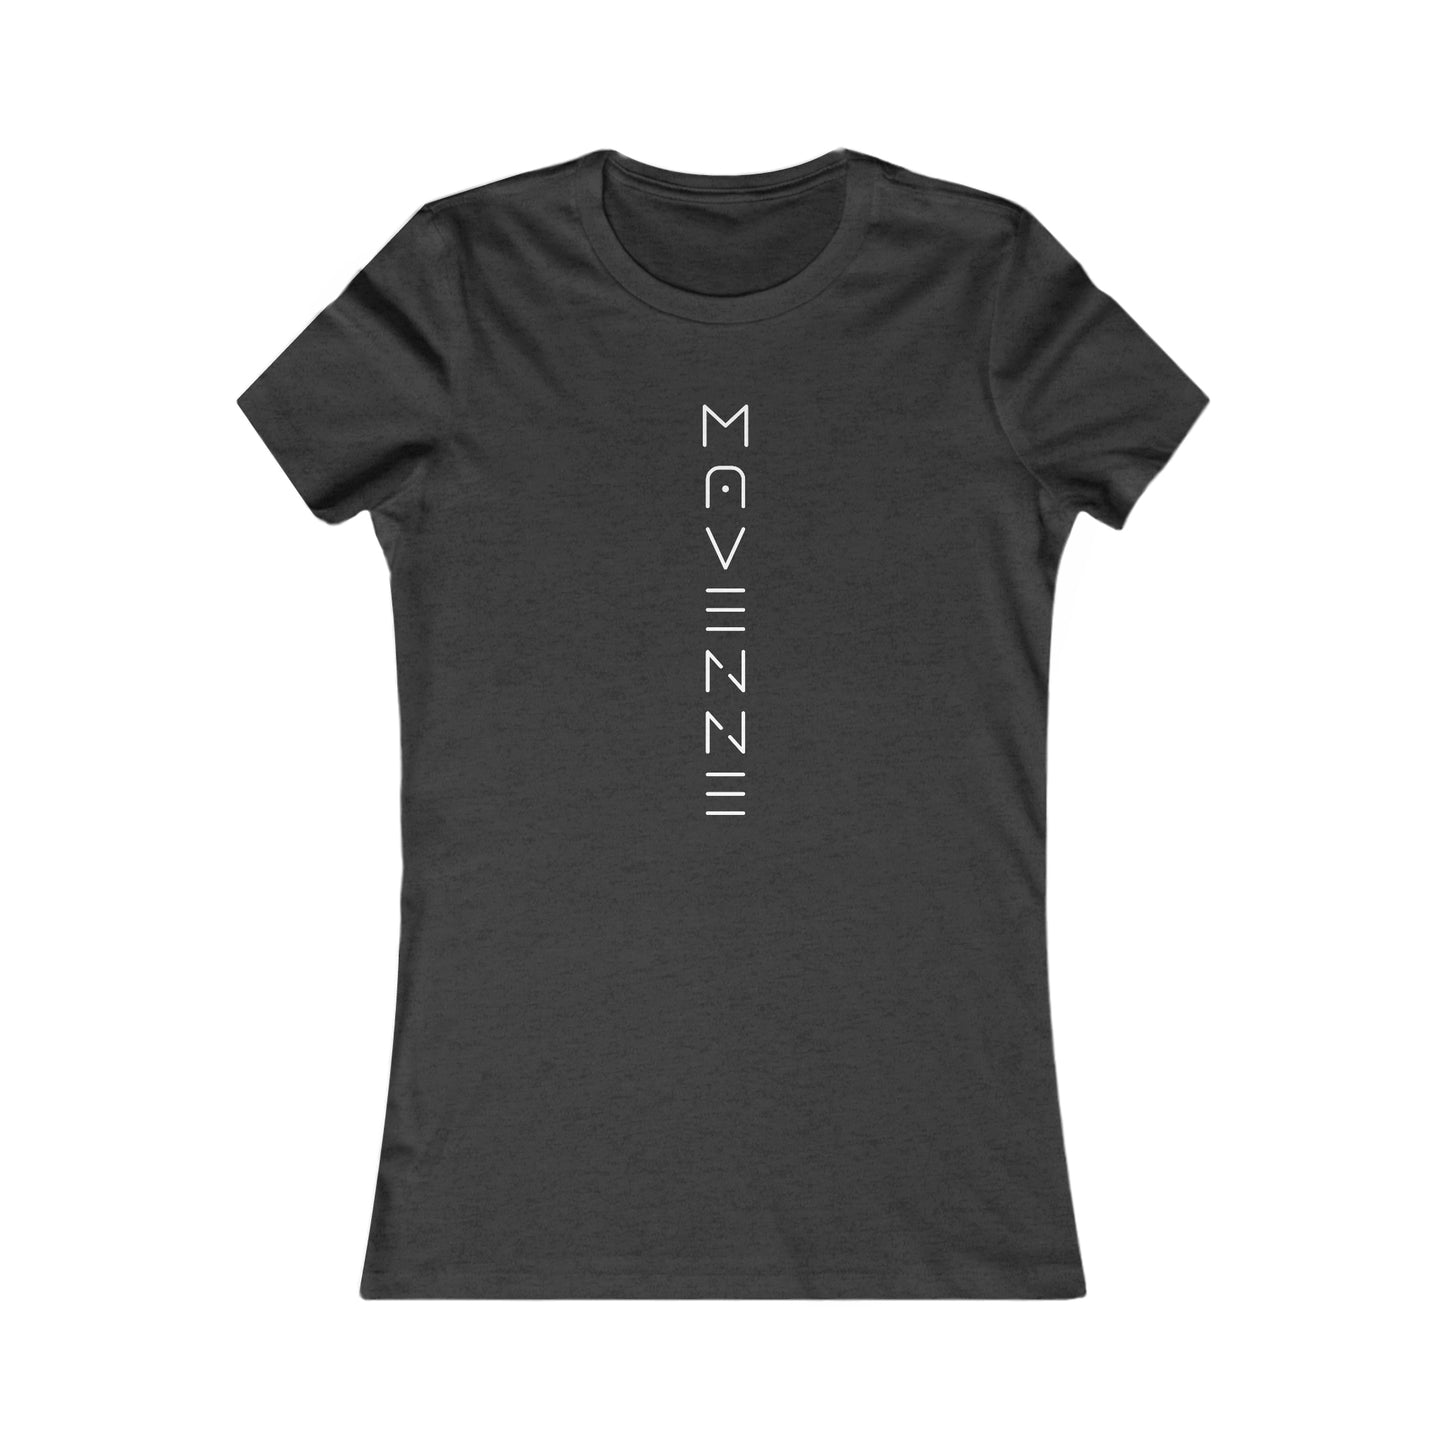 Ladies' cut Sci-fi Tee (click to select your color)